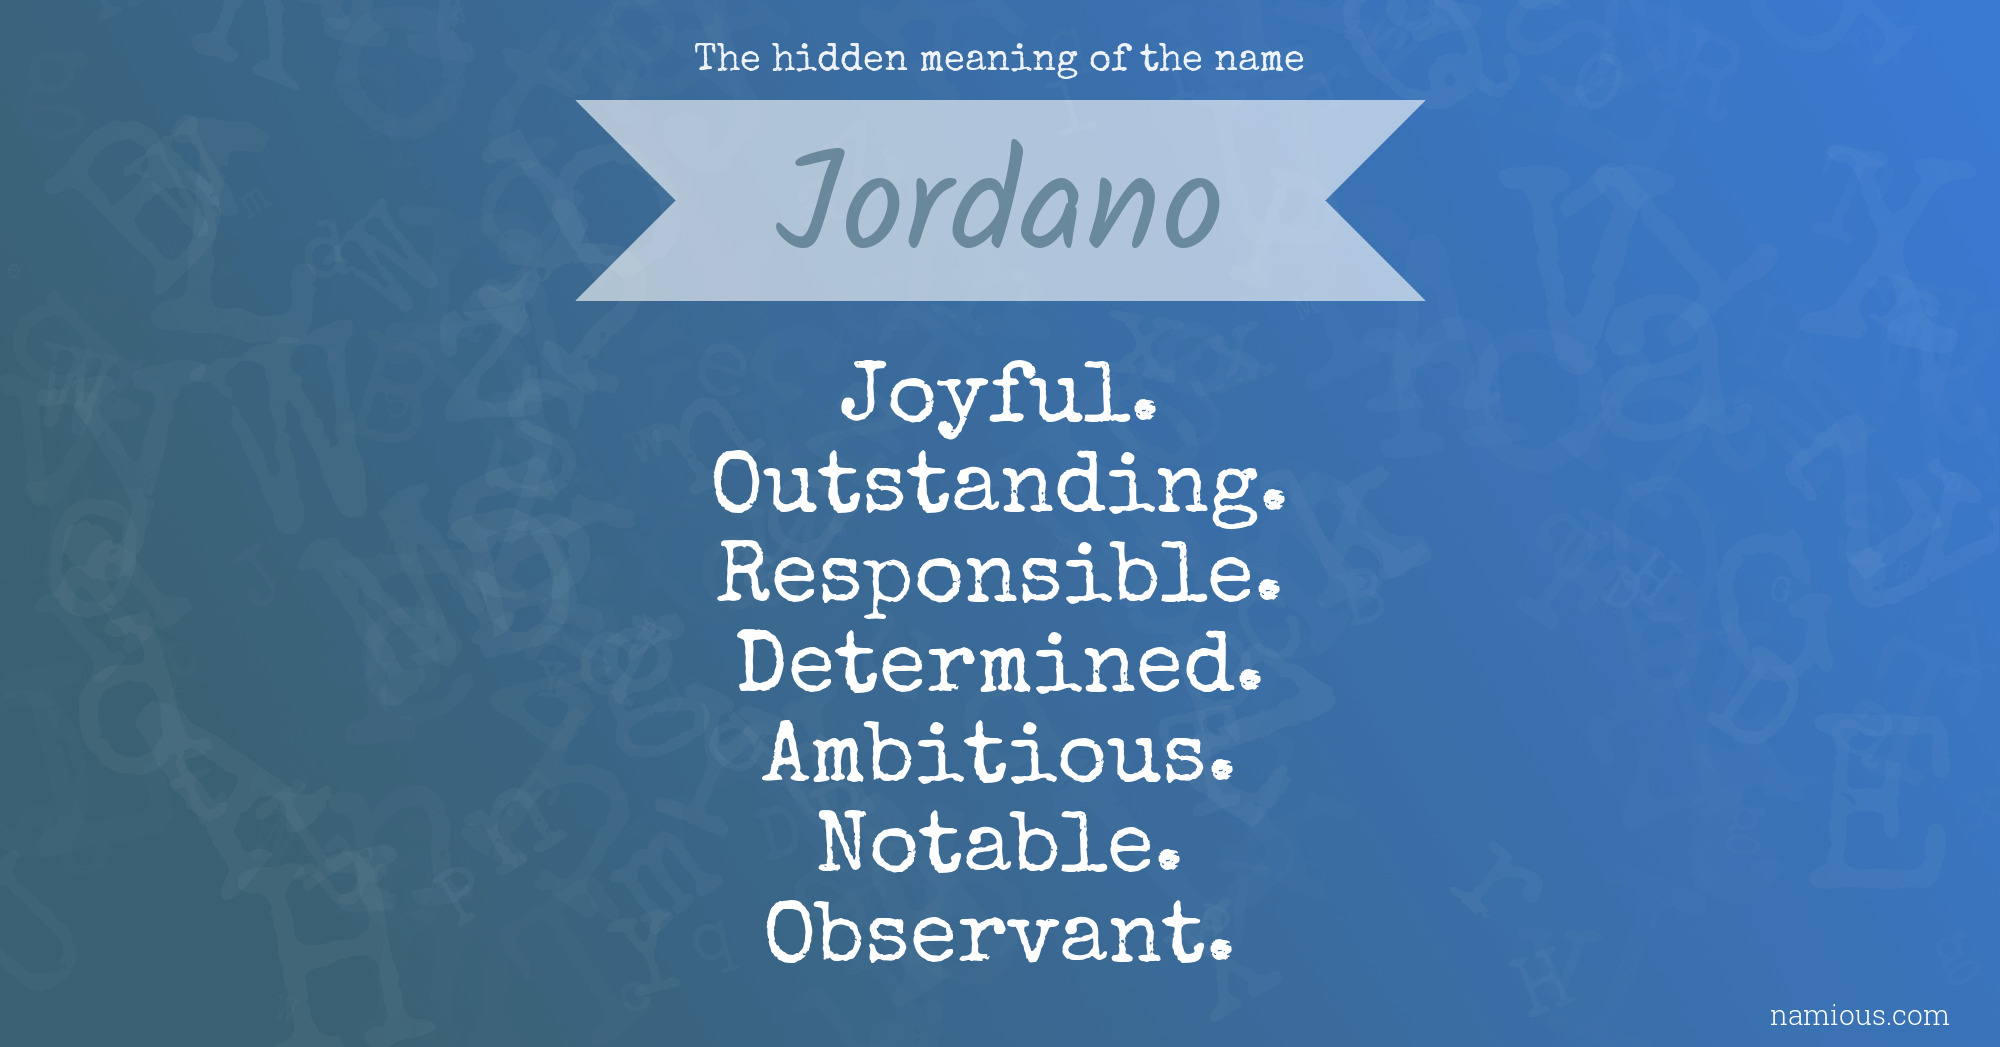 The hidden meaning of the name Jordano